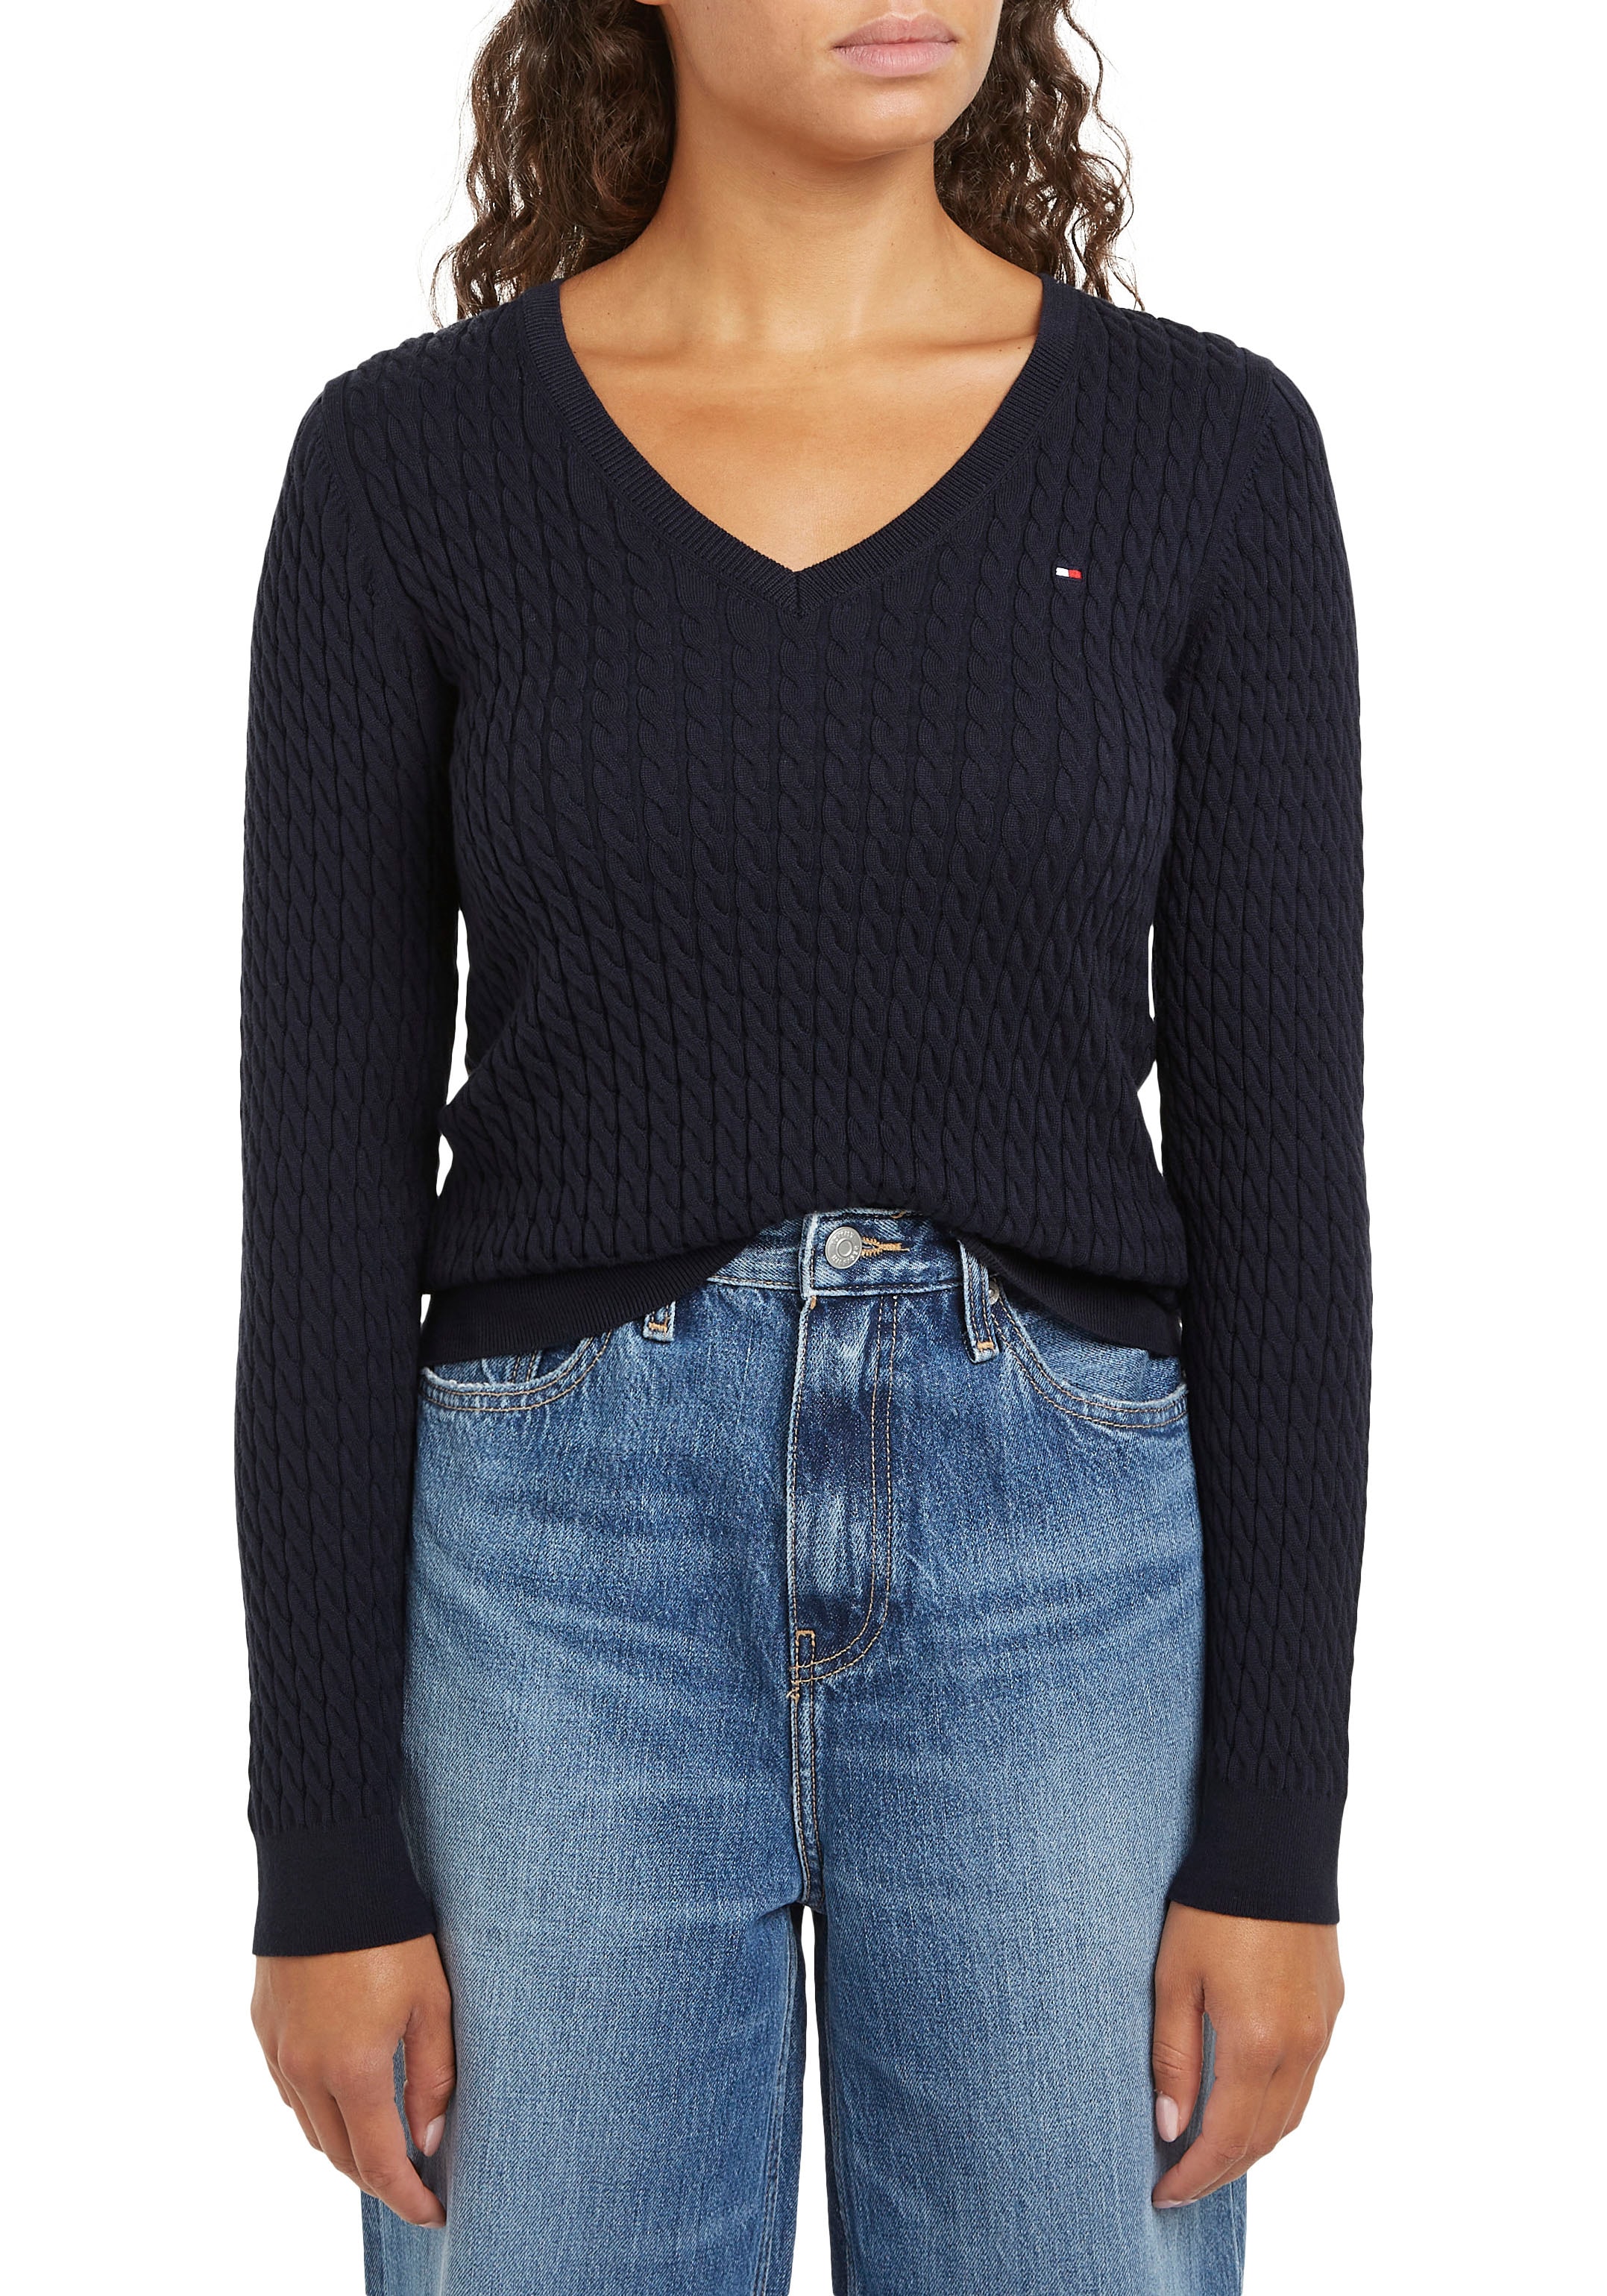 Tommy Hilfiger Strickpullover »CO CABLE V-NK SWEATER«, mit Zopfmuster